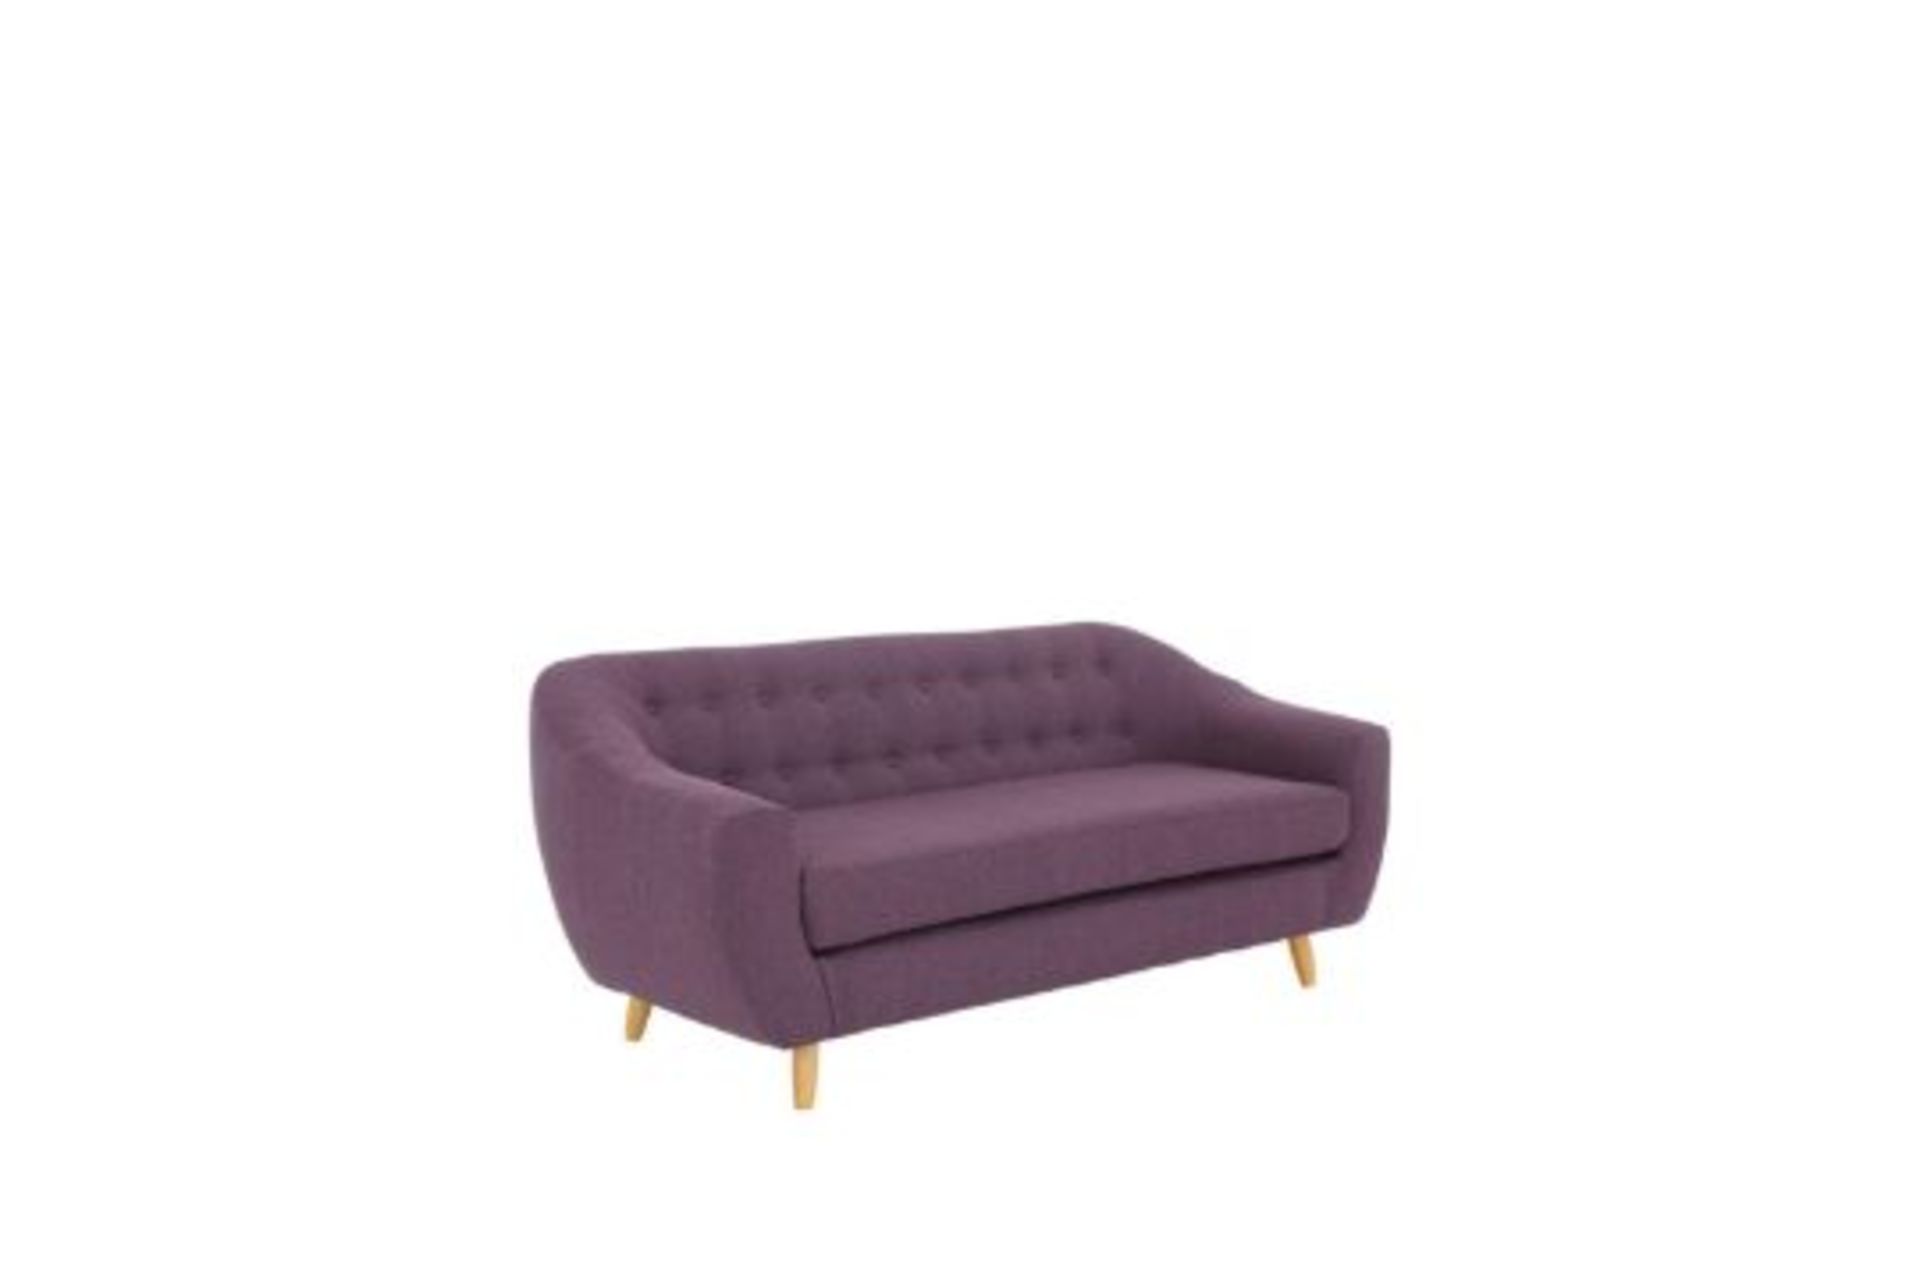 CLAUDIA 3 SEATER SOFA. RPP £479.00. Dimensions: Height 87, Width 188, Depth 82 cm (approx.) - Image 3 of 3